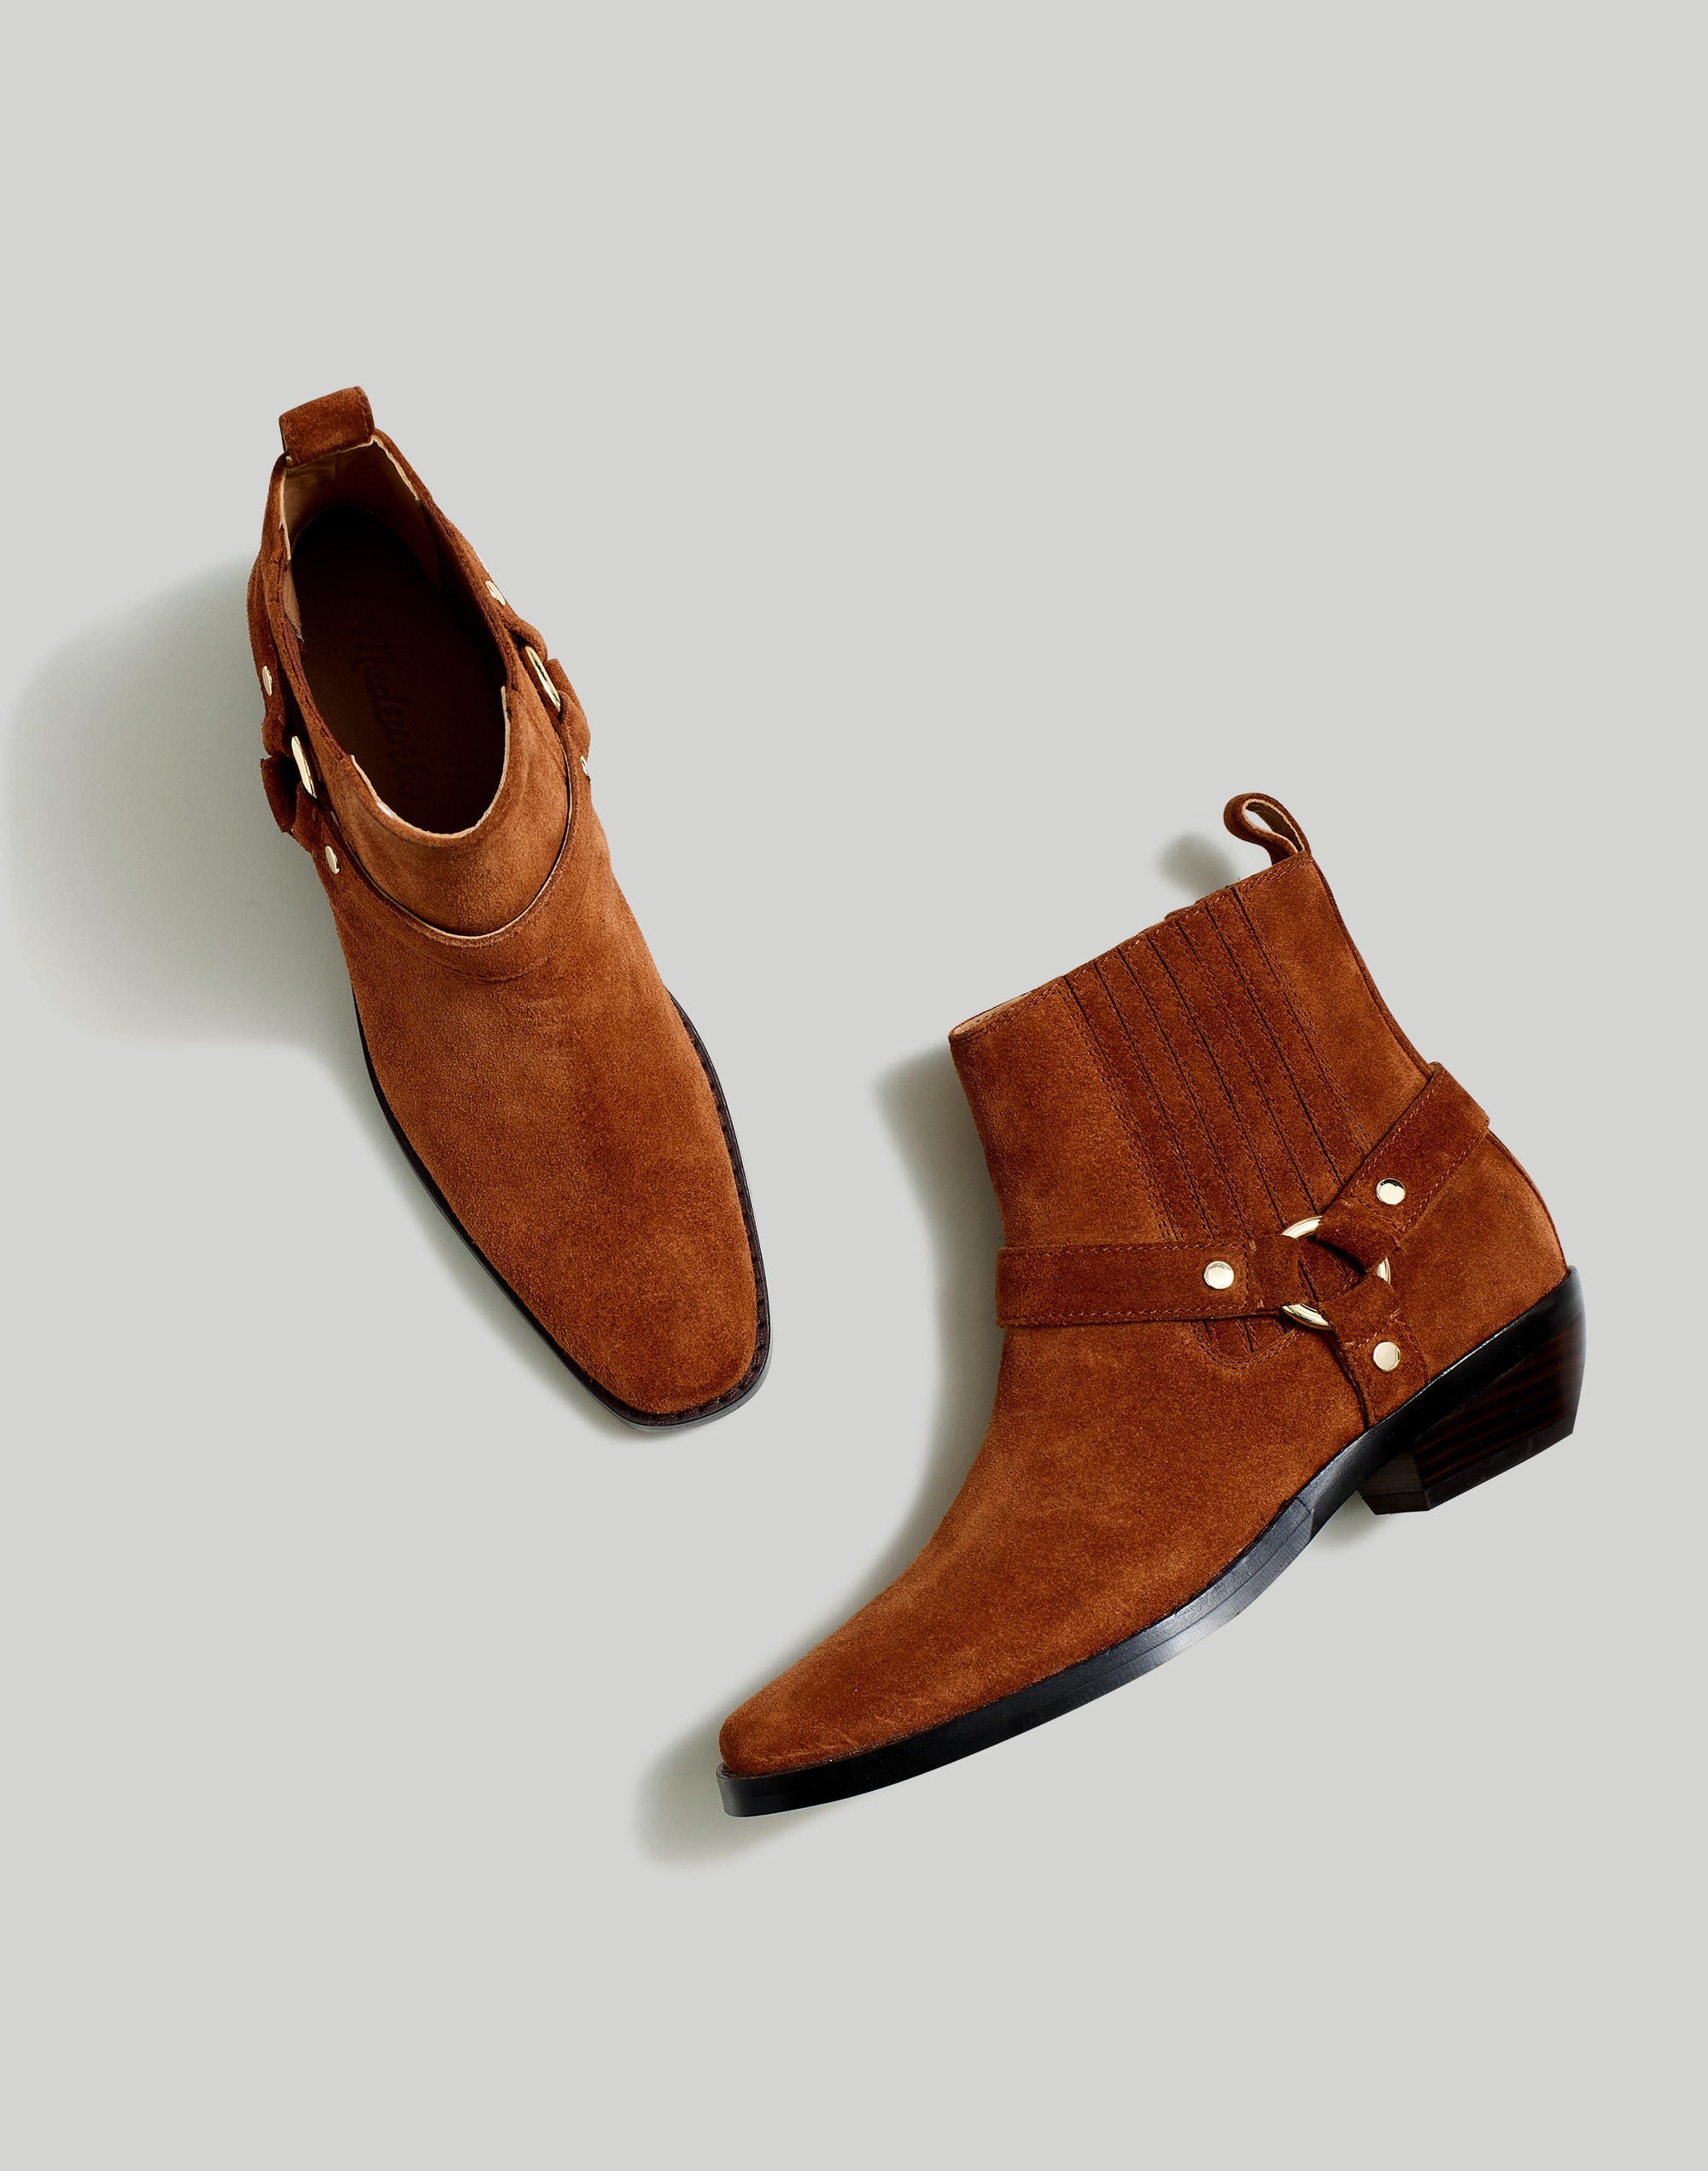 The Santiago Western Ankle Boot Suede